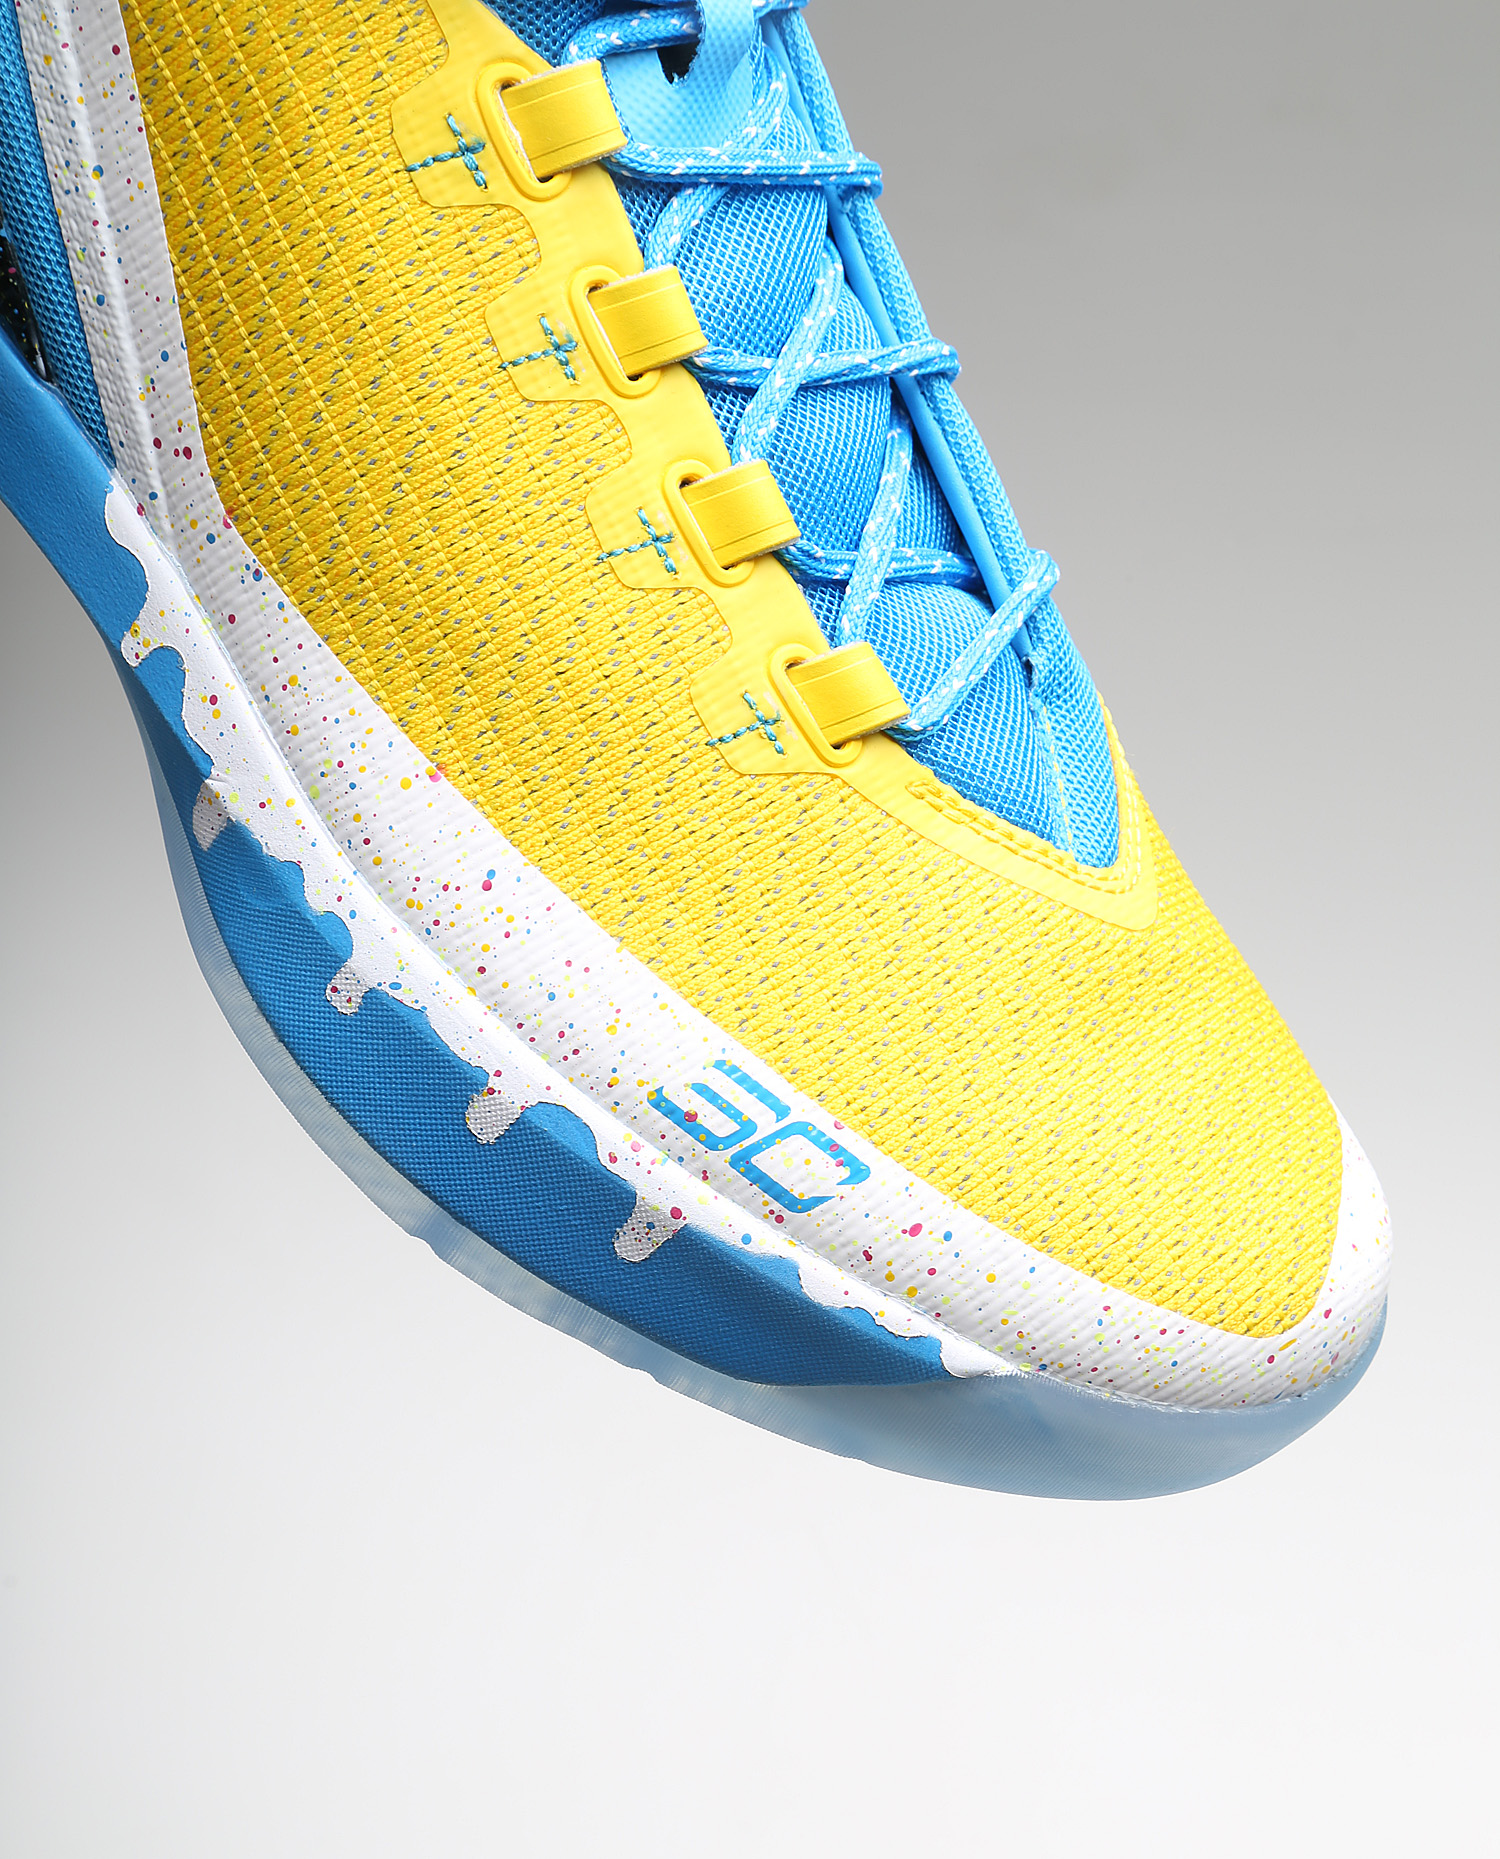 curry 3 birthday shoes Online Shopping 